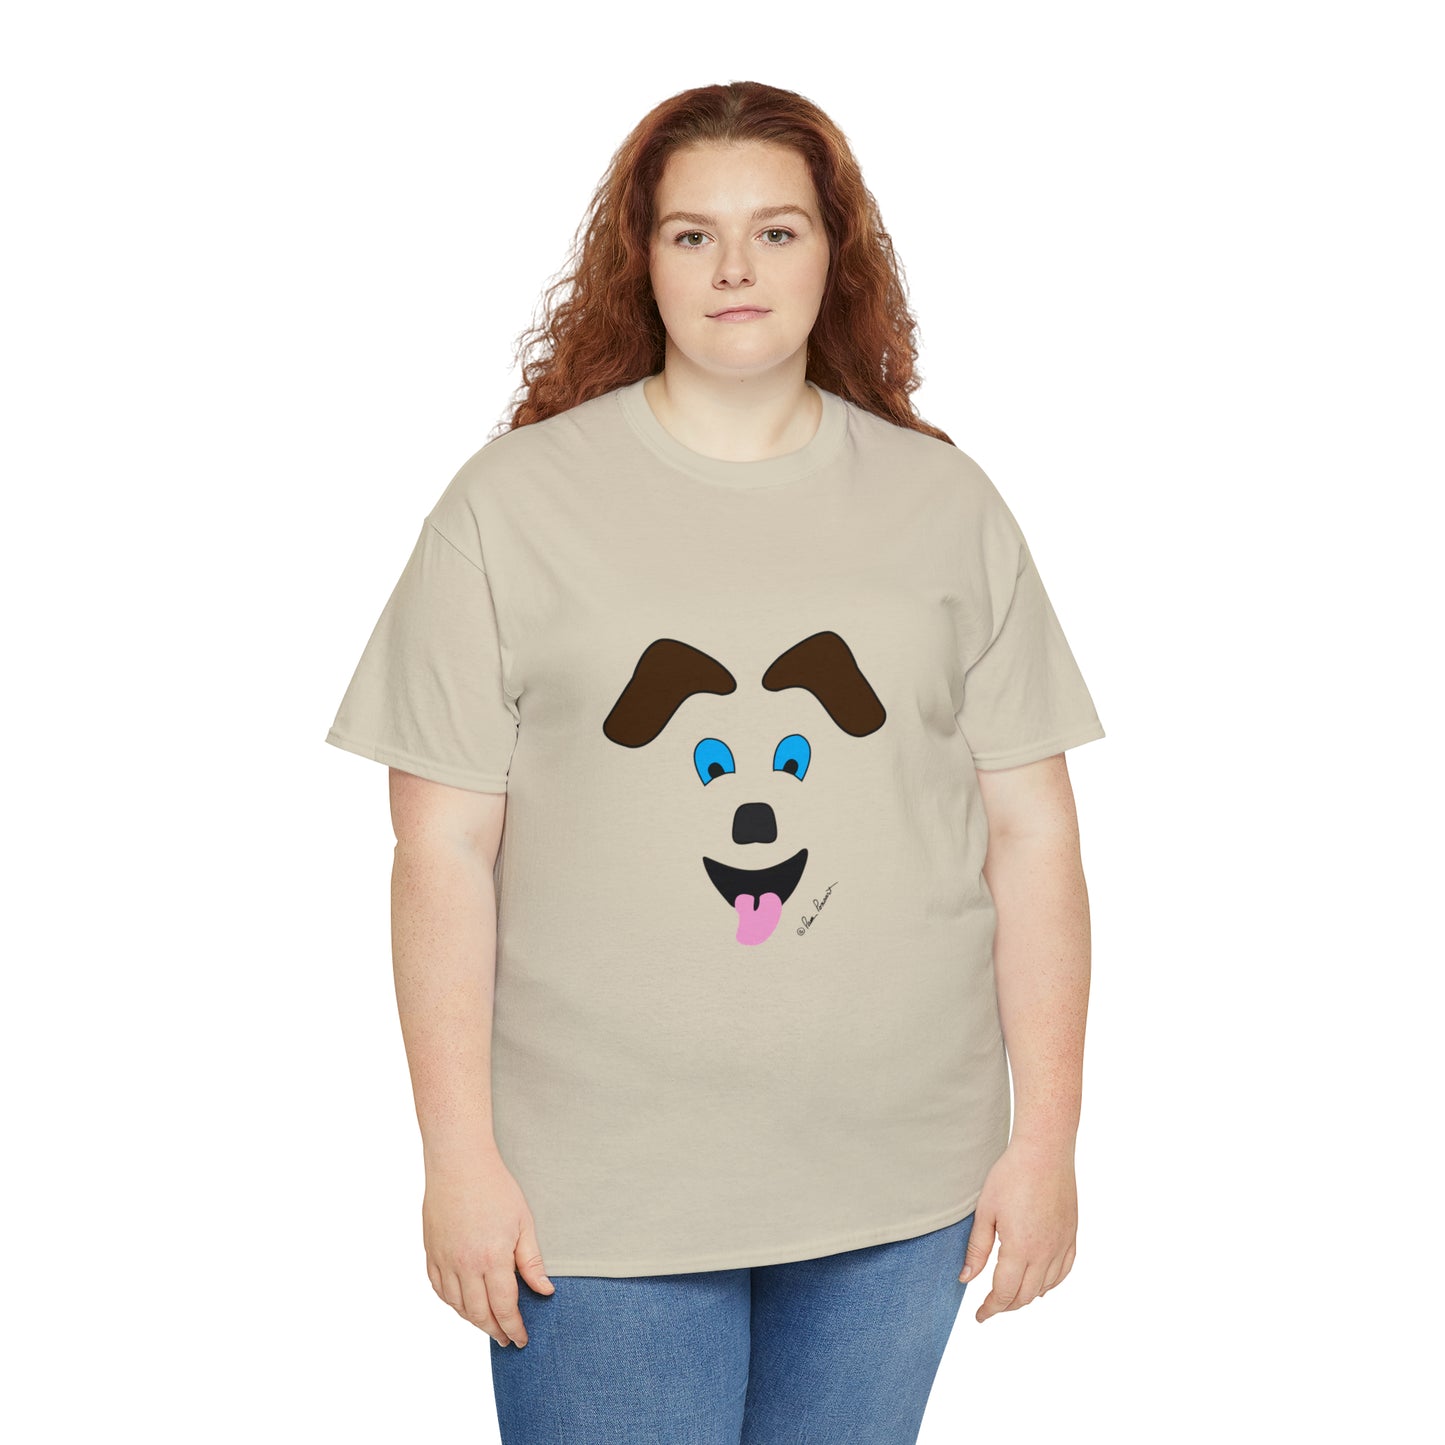 Mock up of a plus-size woman wearing the Sand shirt